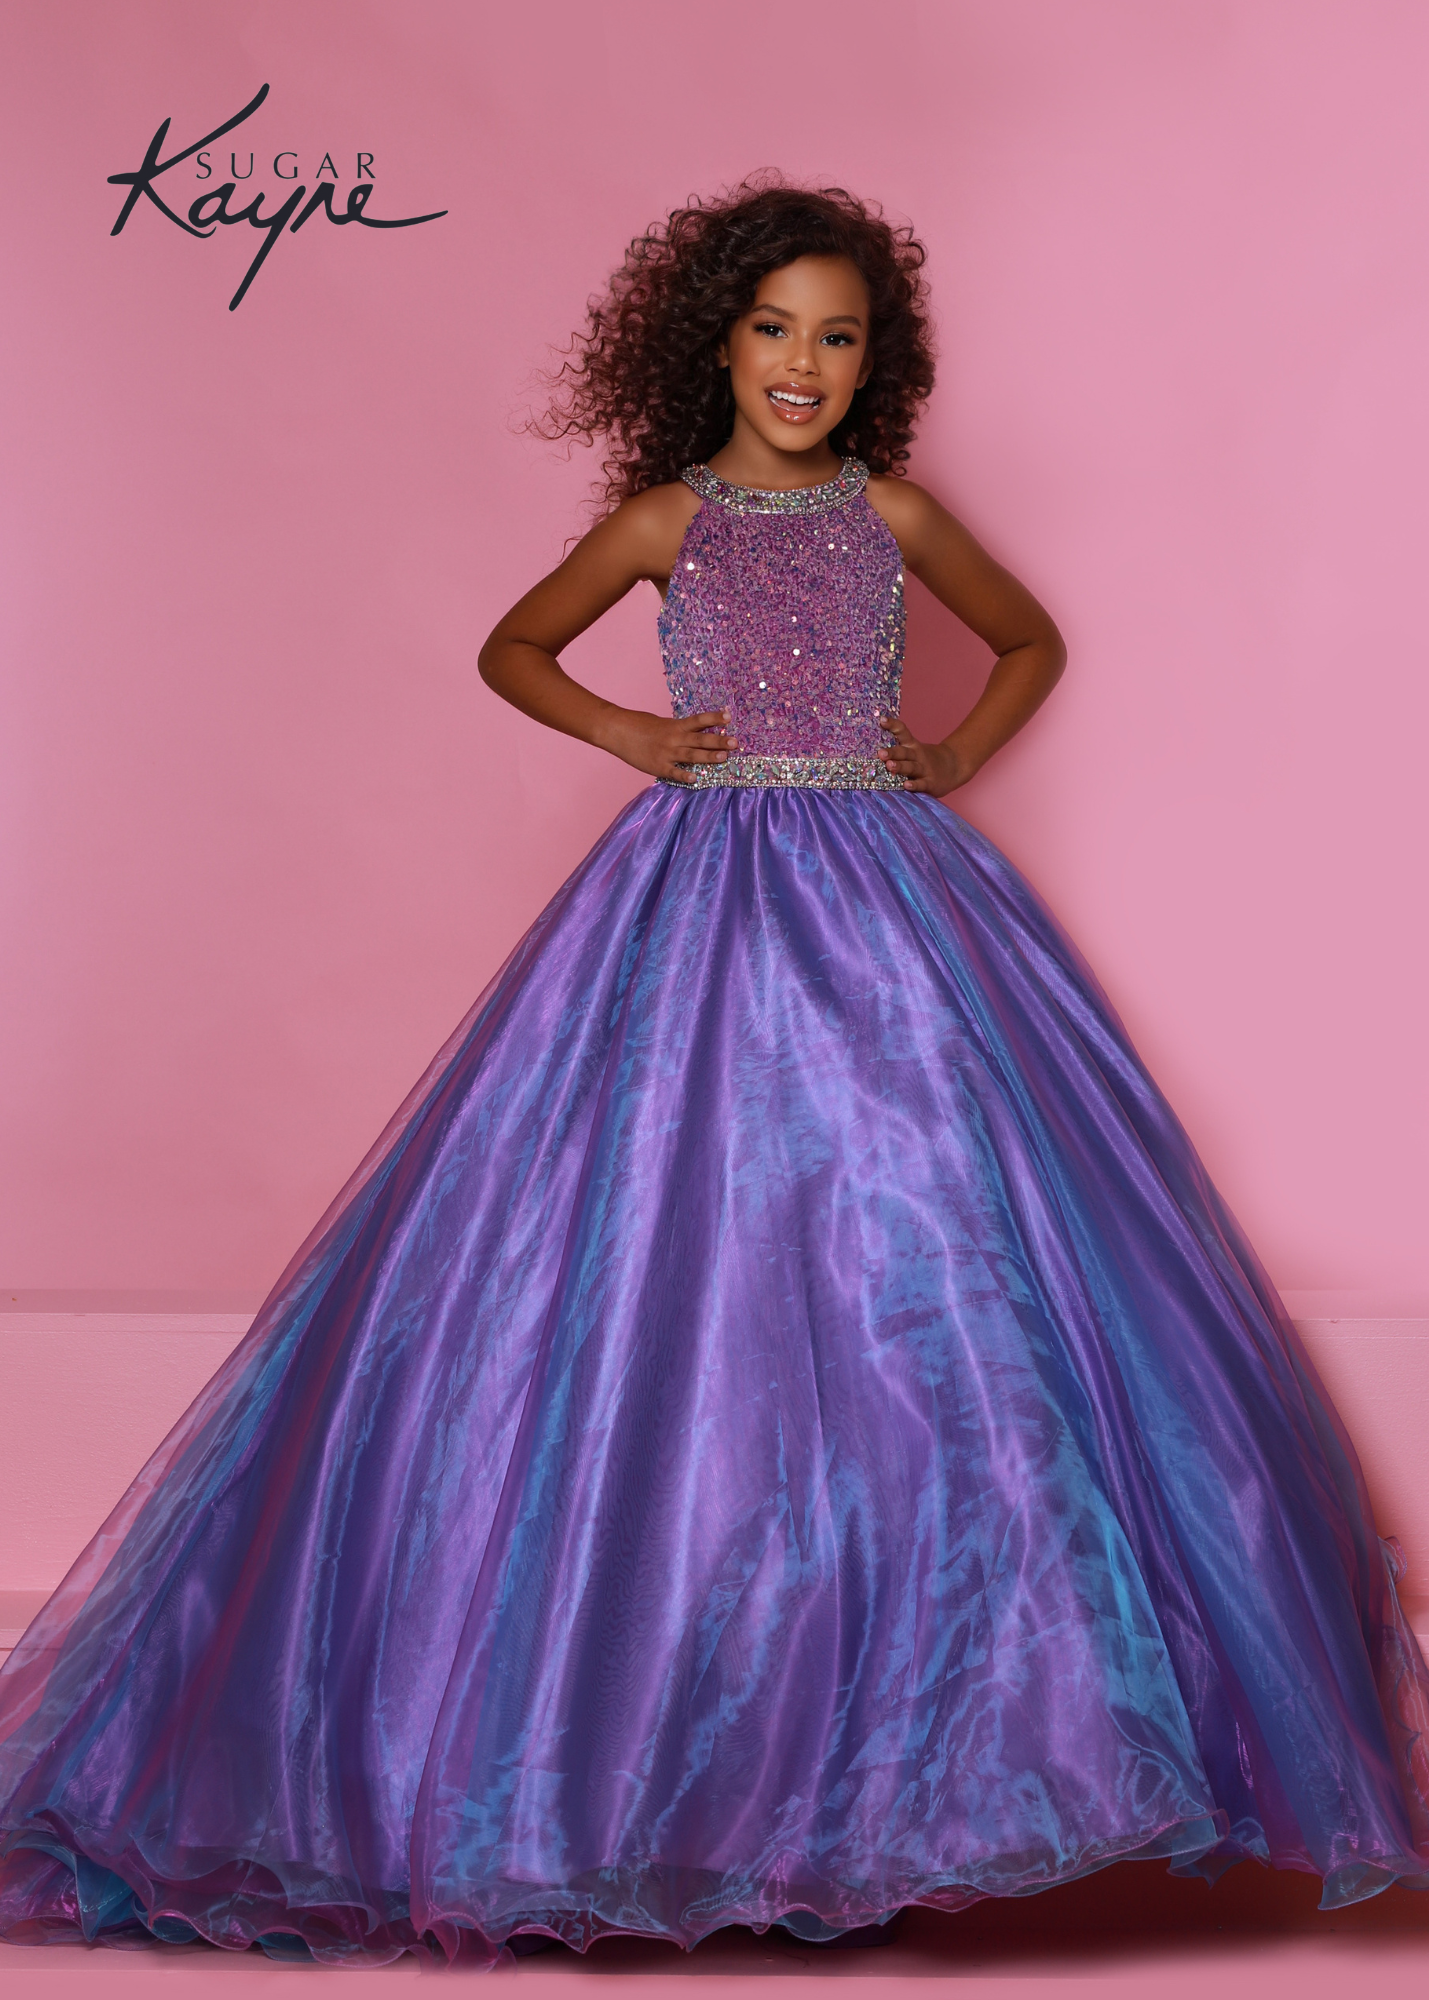 Sugar Kayne c321 sequin stretch velvet with beaded collar and waist band accent Sugar Kayne C321 Velvet Sequin High neck Girls Pageant Dress Shimmer Ballgown Formal  Available Sizes: 2-16  Available Colors: Aqua. Orchid